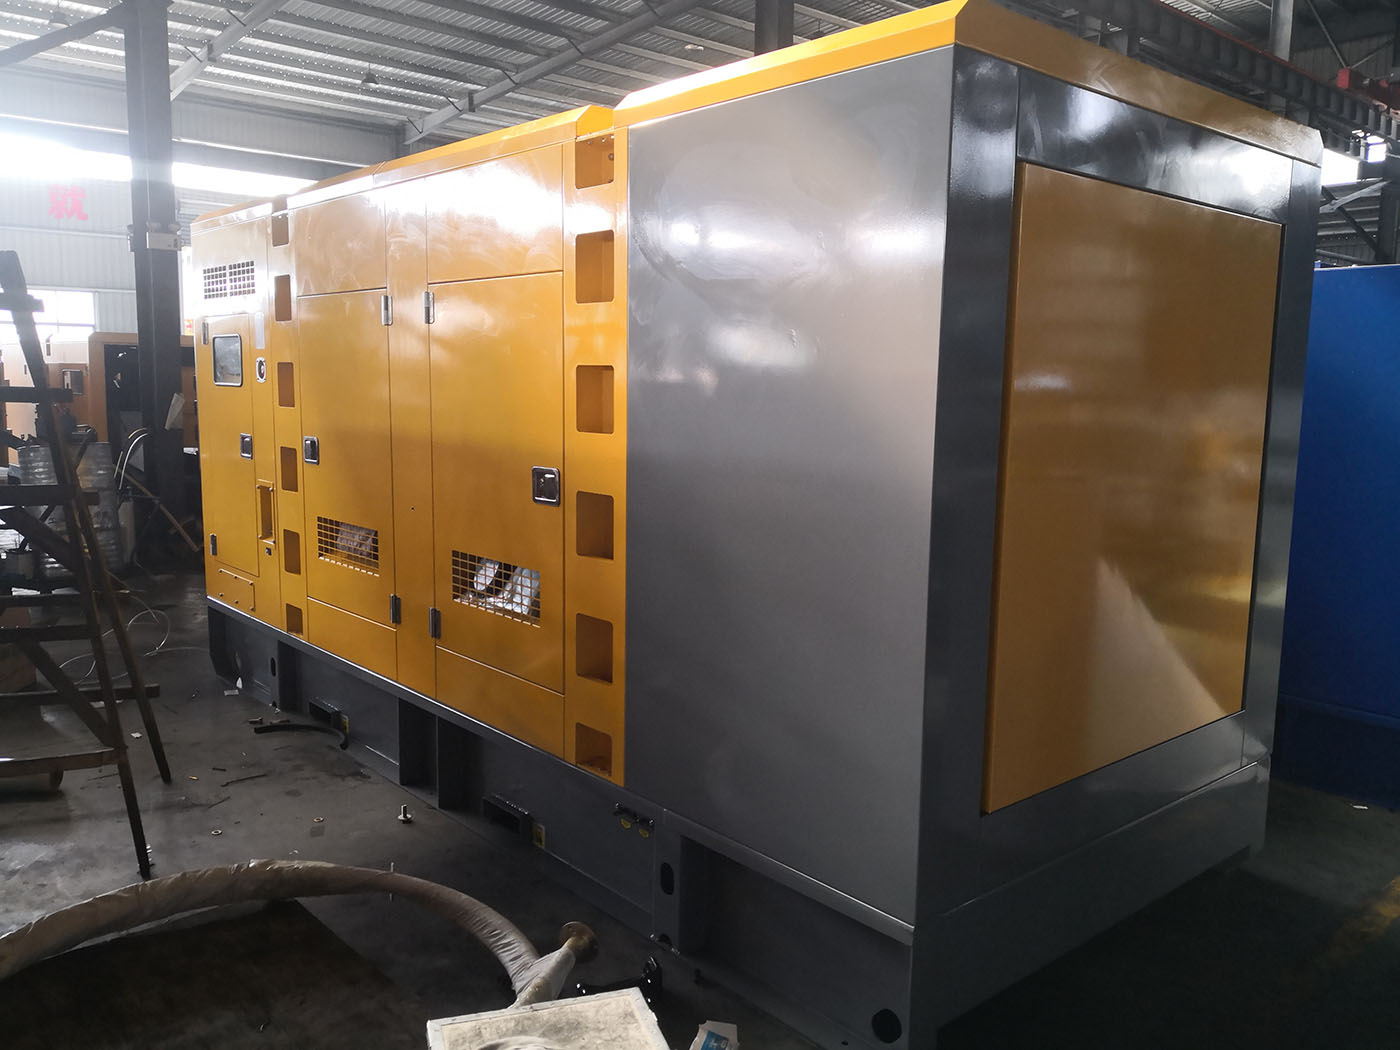 New Delivery for Wintpower Silent type Cummins Diesel Generator Set 500KVA and 300KVA